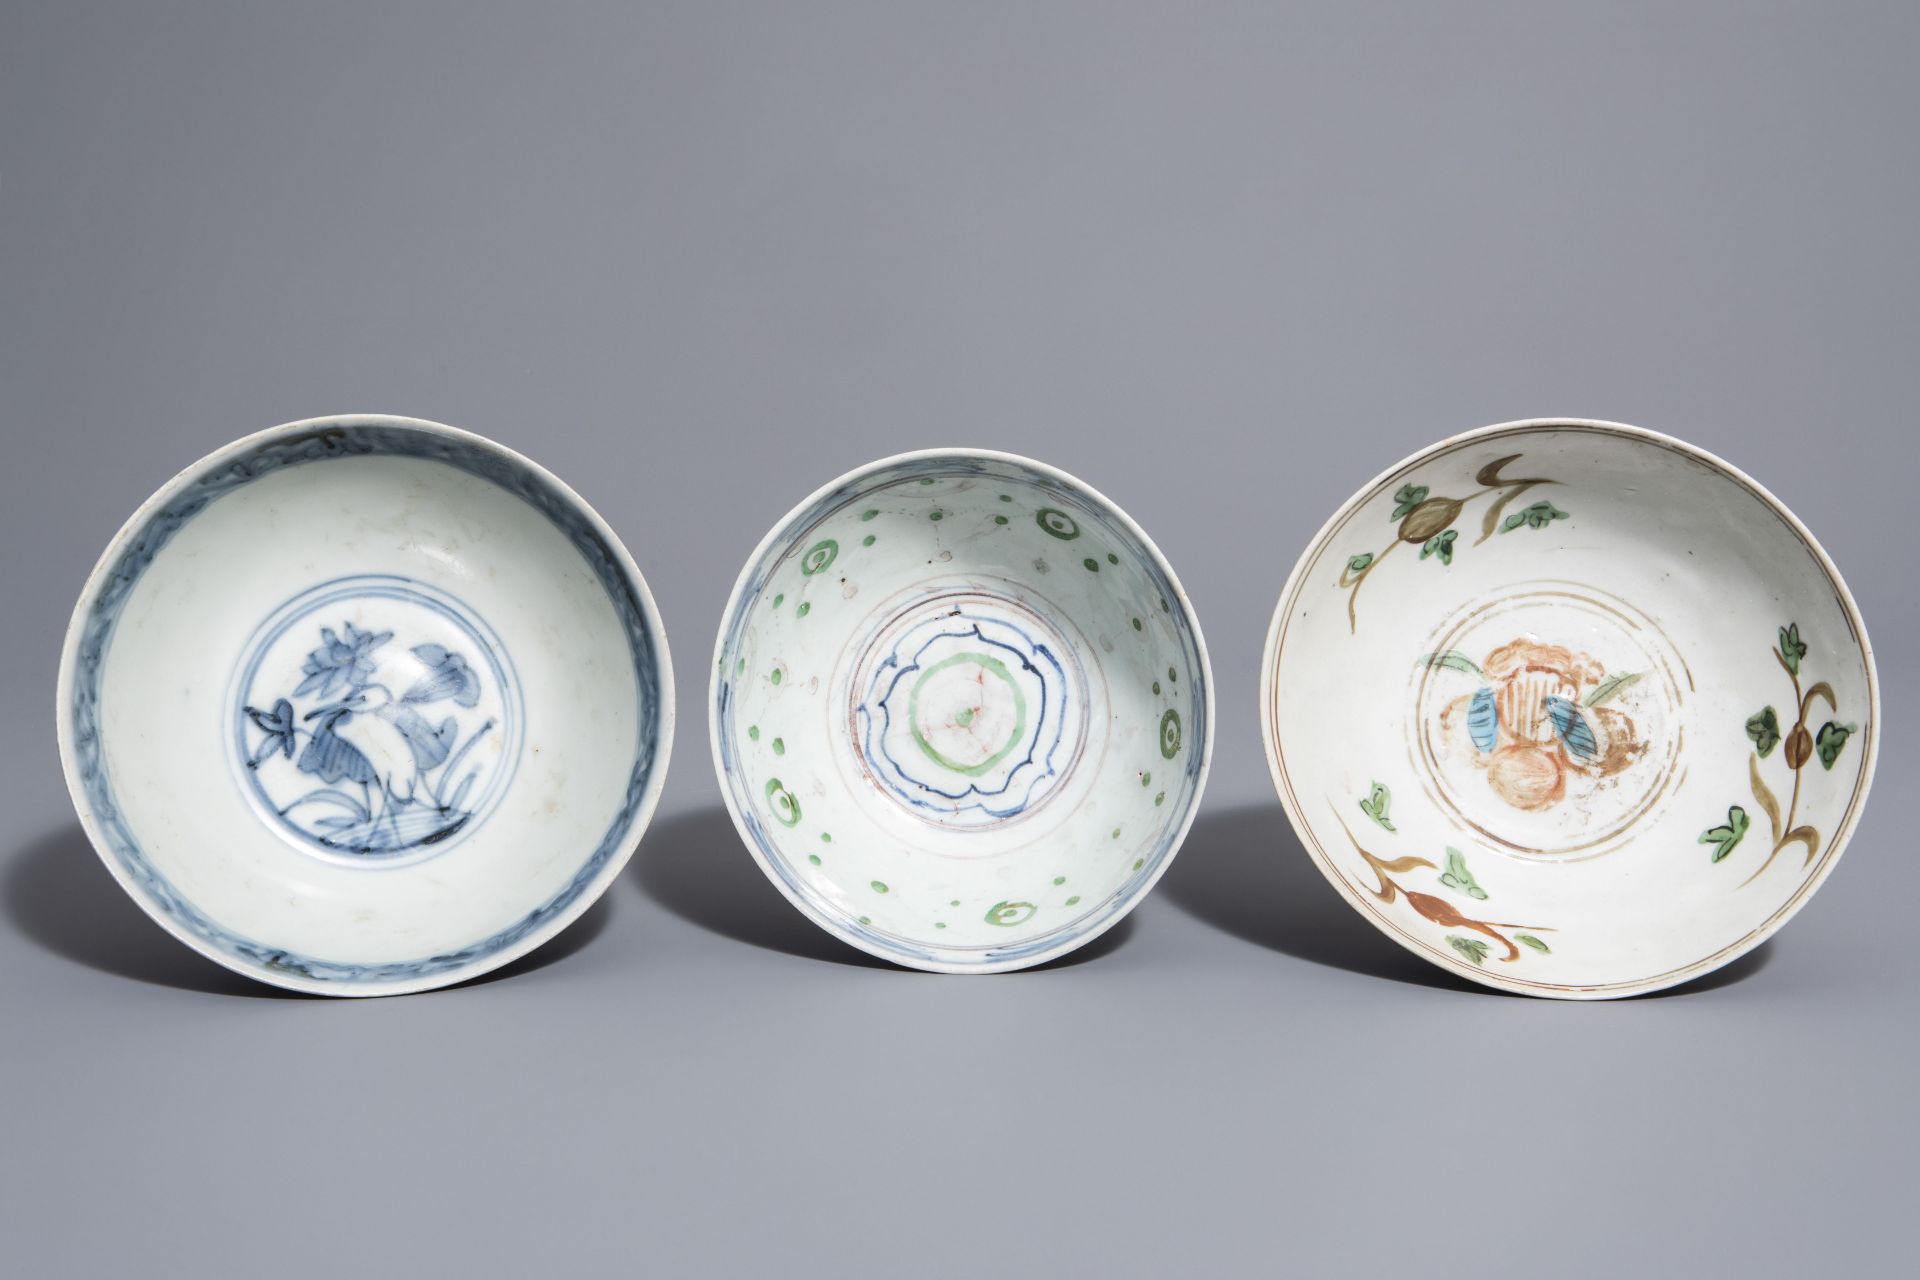 Three Chinese blue, white and polychrome Swatow bowls with different designs, 17th C. - Image 6 of 7